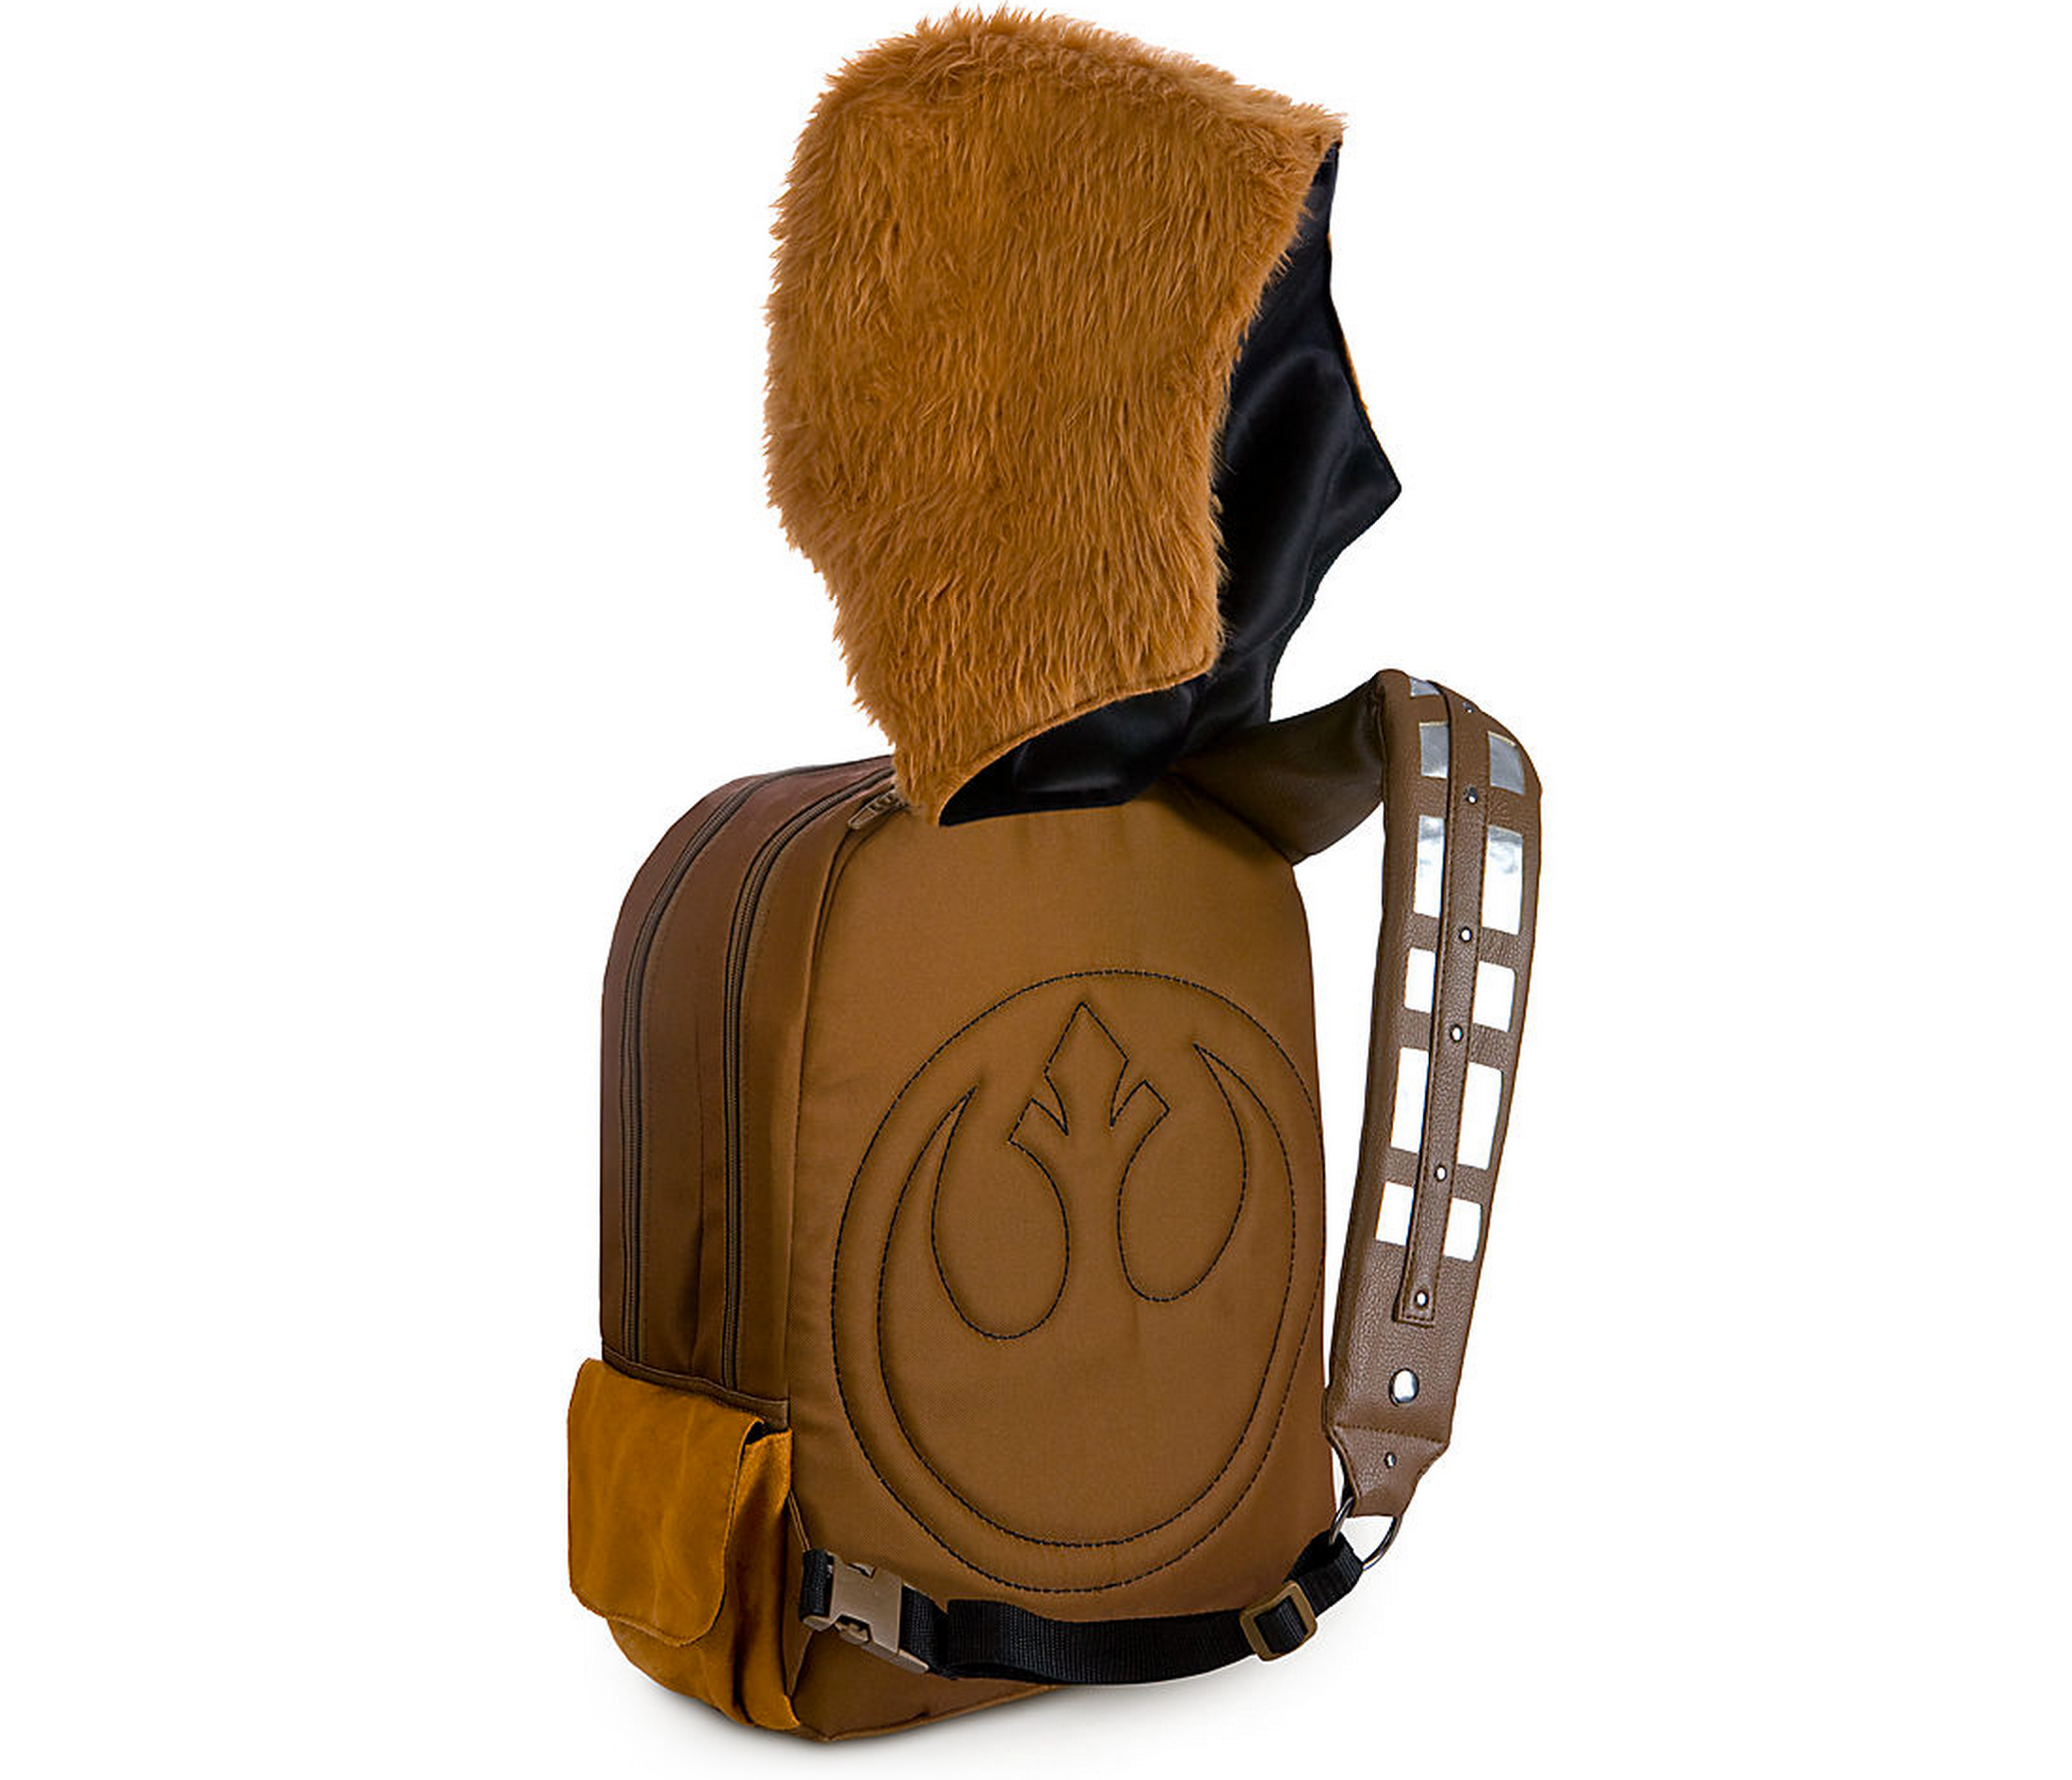 This Chewbackpack Is The Best Way To Carry Home Your Star Wars Treasures